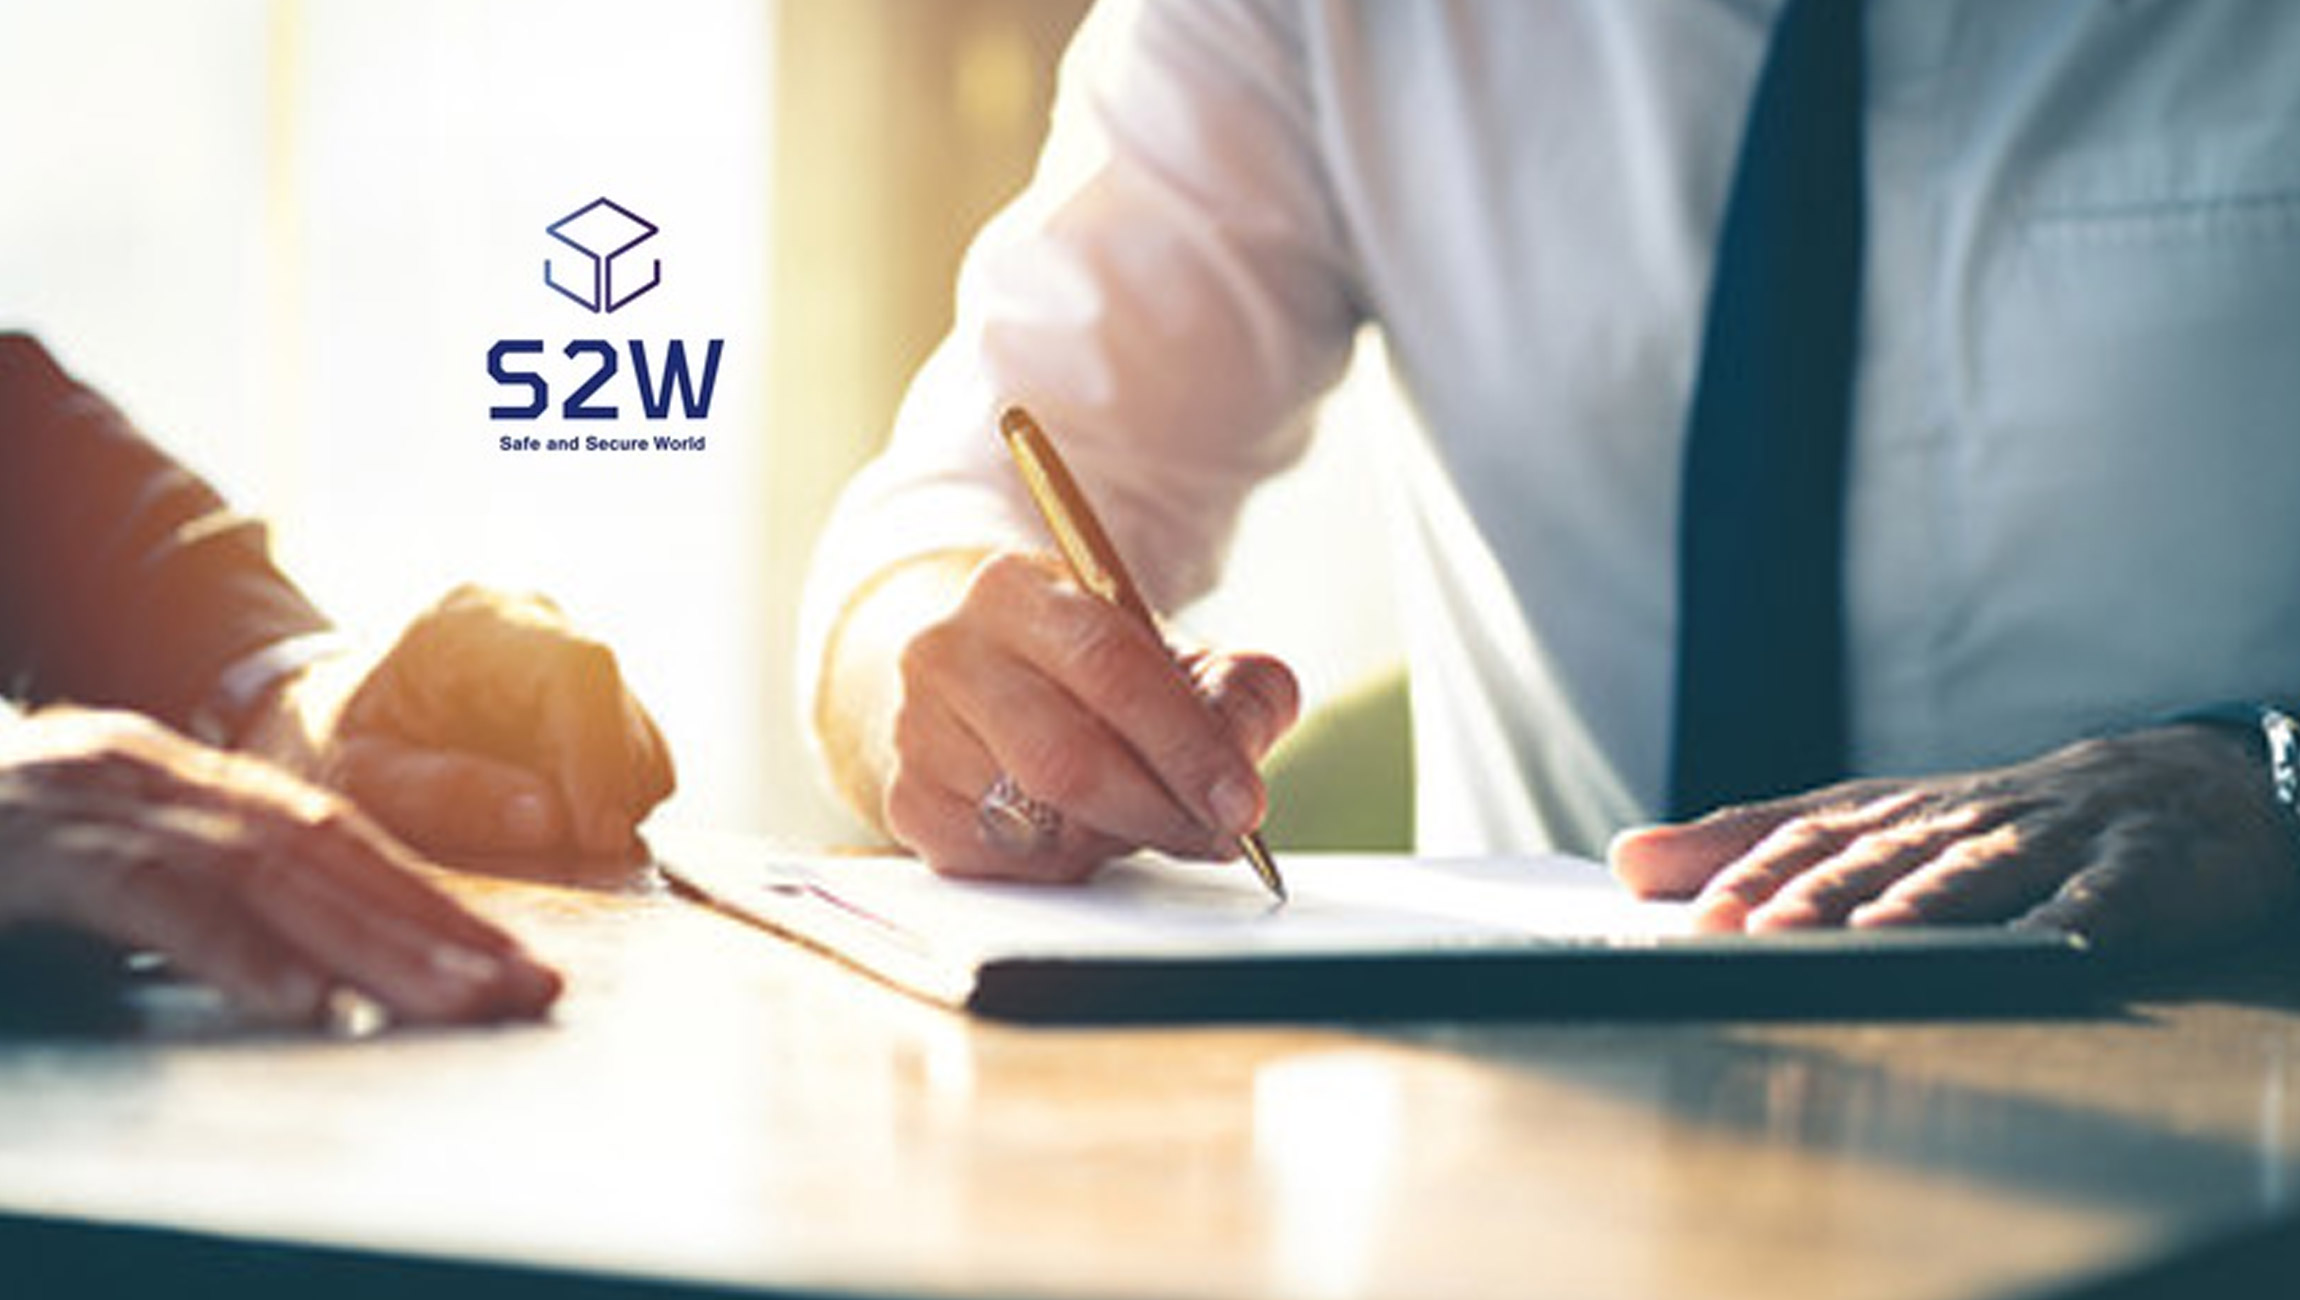 S2W Has Signed Contribution Agreement With INTERPOL for CTI Solution XARVIS ENTERPRISE